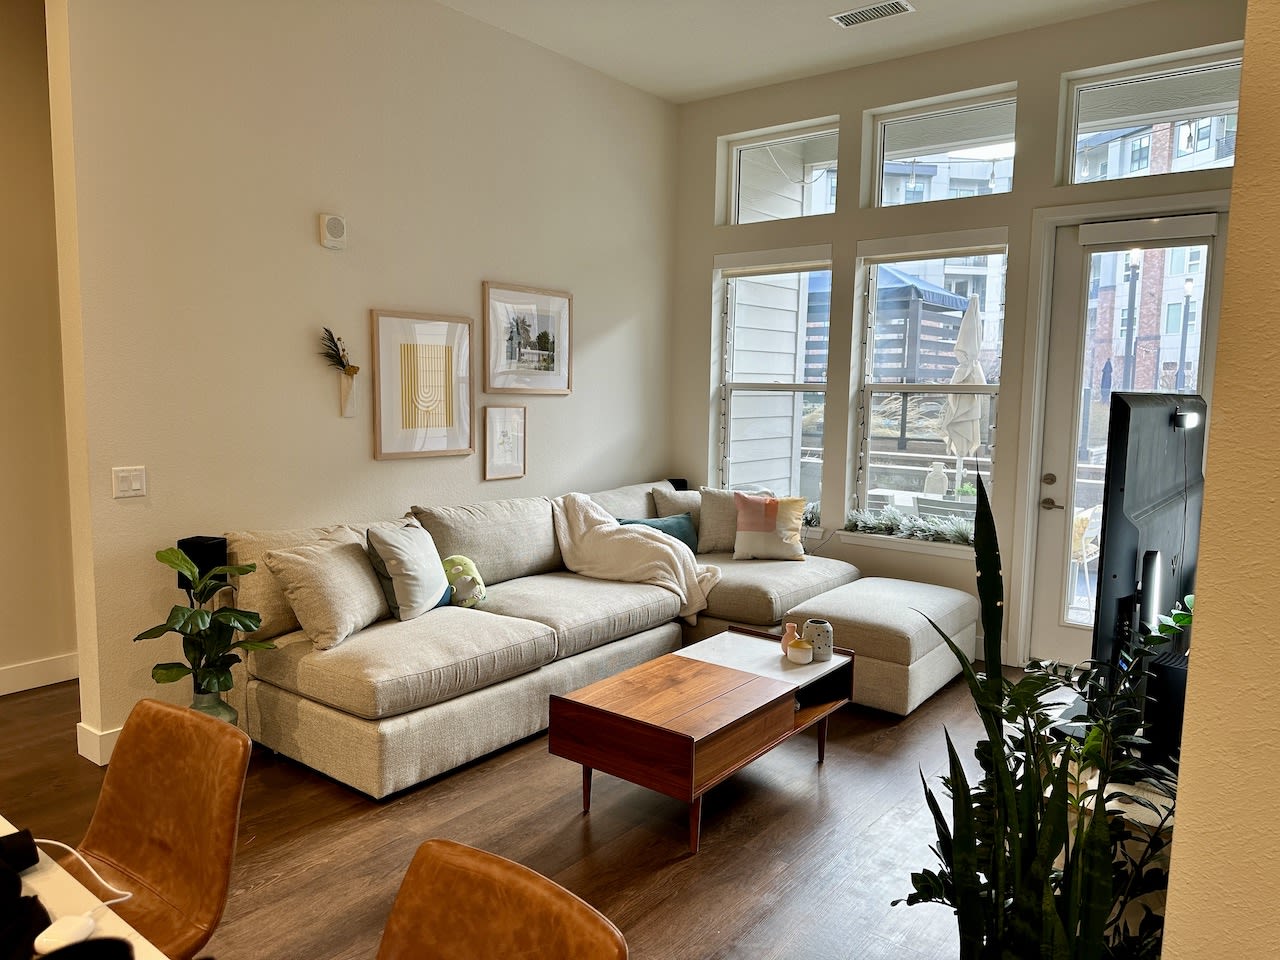 Image of a large off-white couch in a livingroom